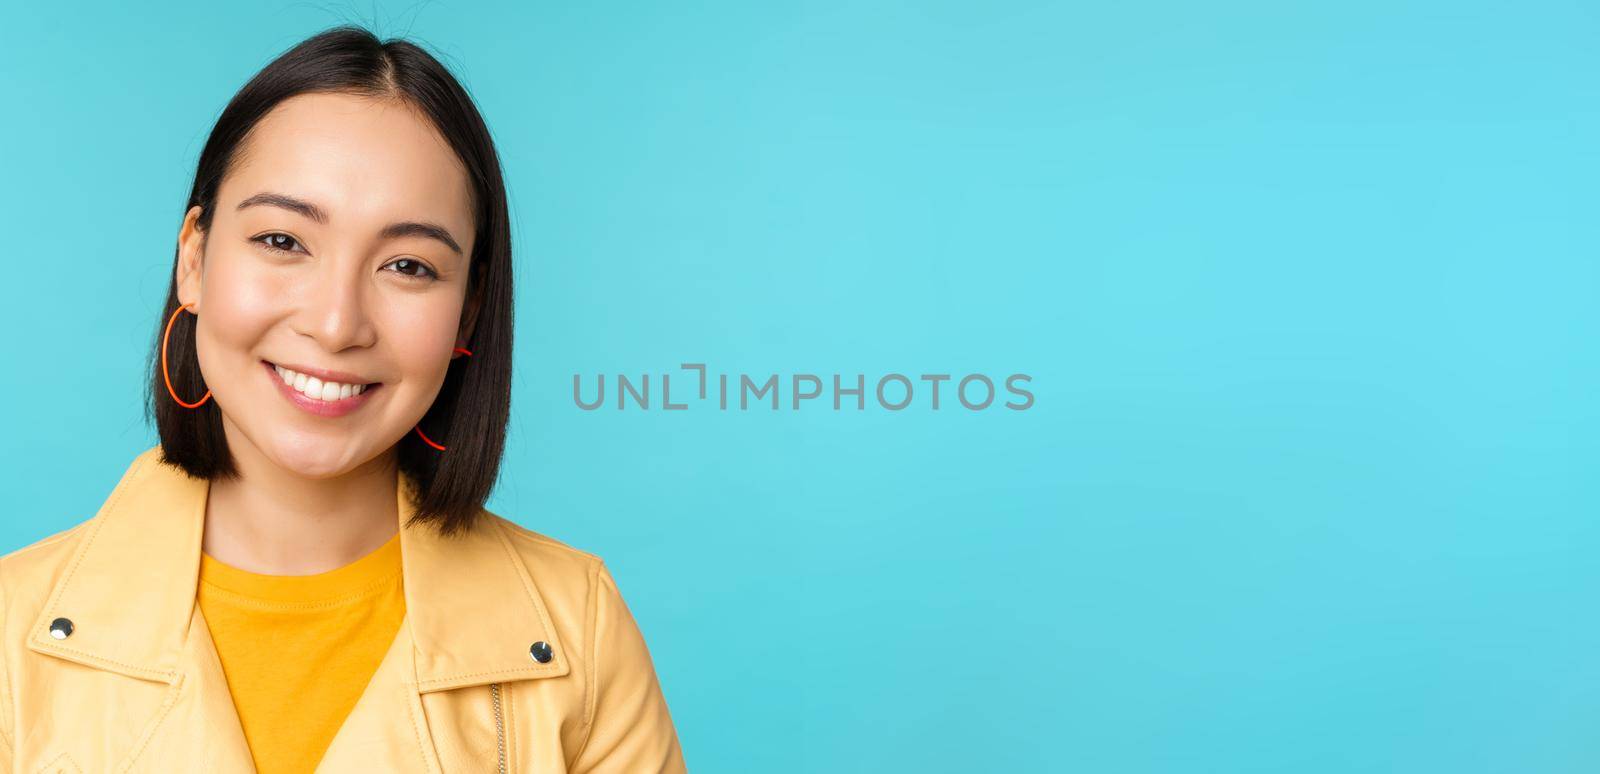 Close up portrait of smiling beautiful asian woman with white teeth, looking happy at camera, posing in yellow jacket over blue studio background.